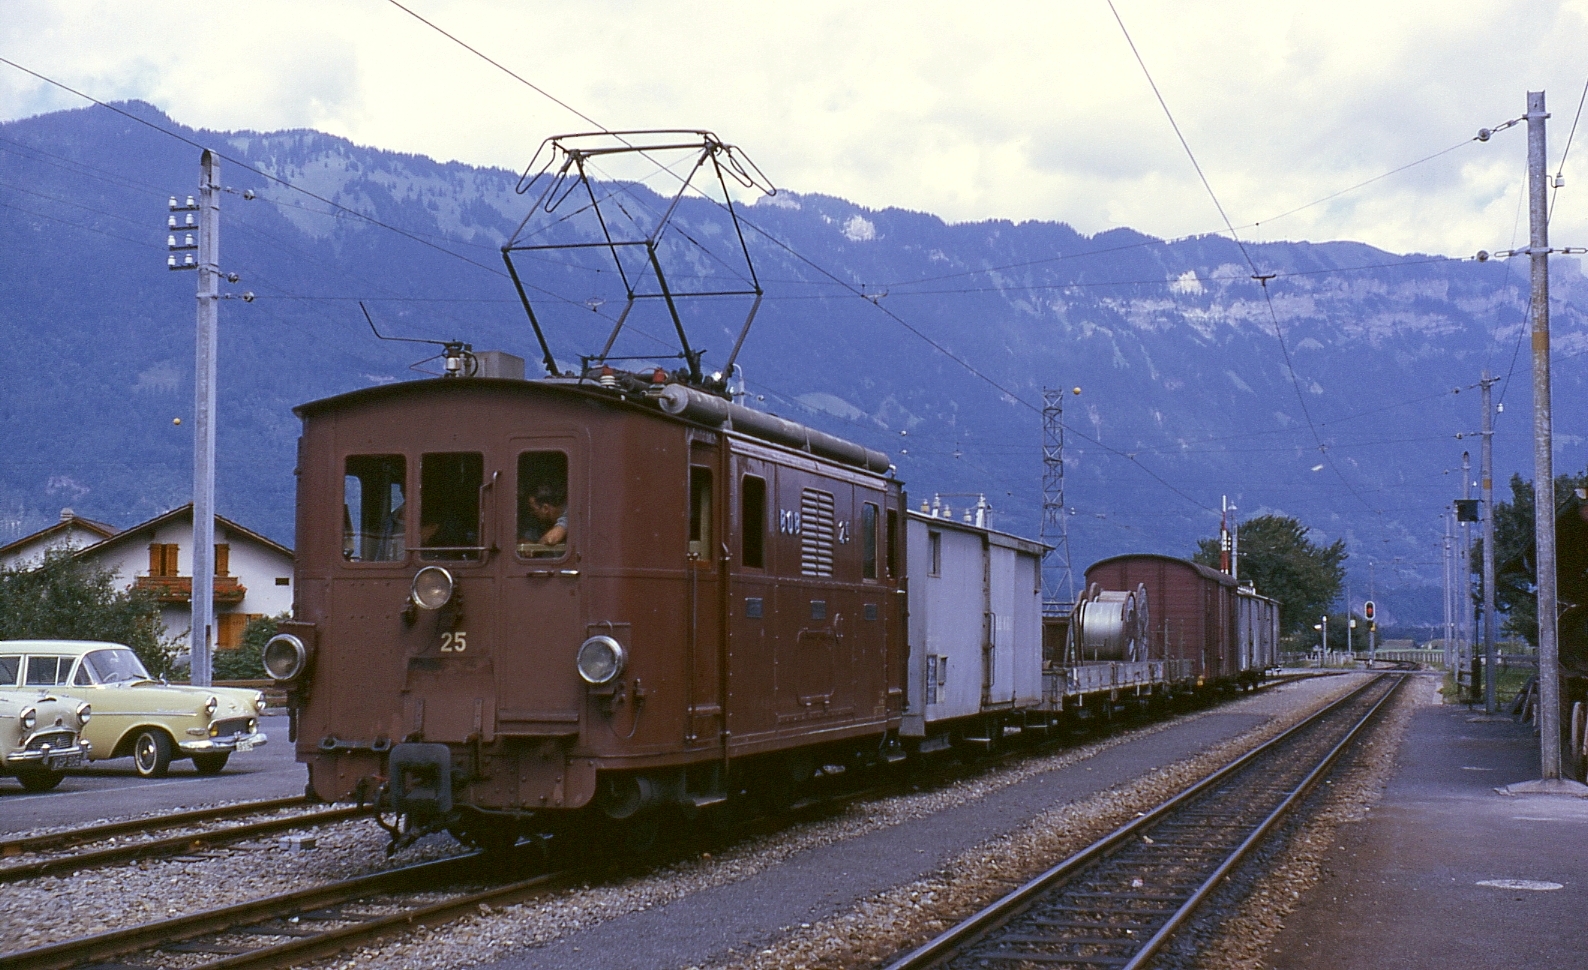 Wilderswil station with a BOB locomotive and goods train.  Taken in August 1962